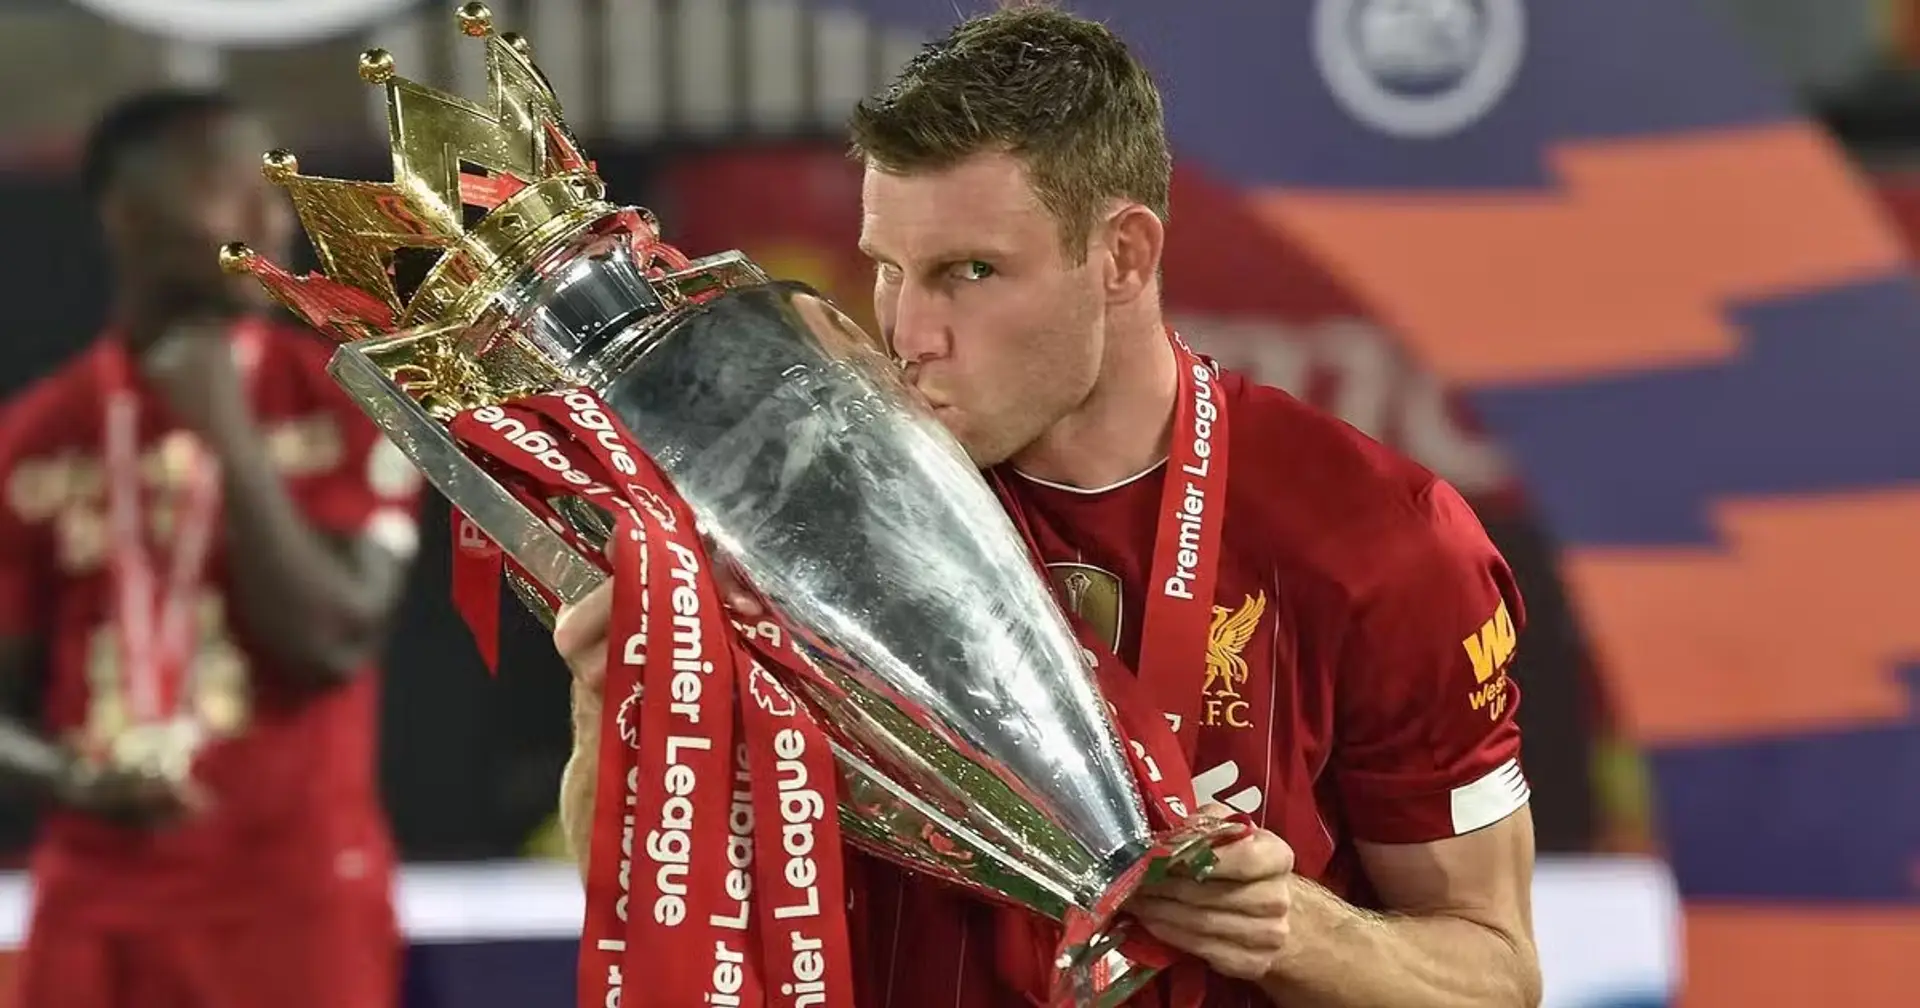 'Let's face it, that was the one fans wanted': Milner on the joy of having won the Premier League for Liverpool